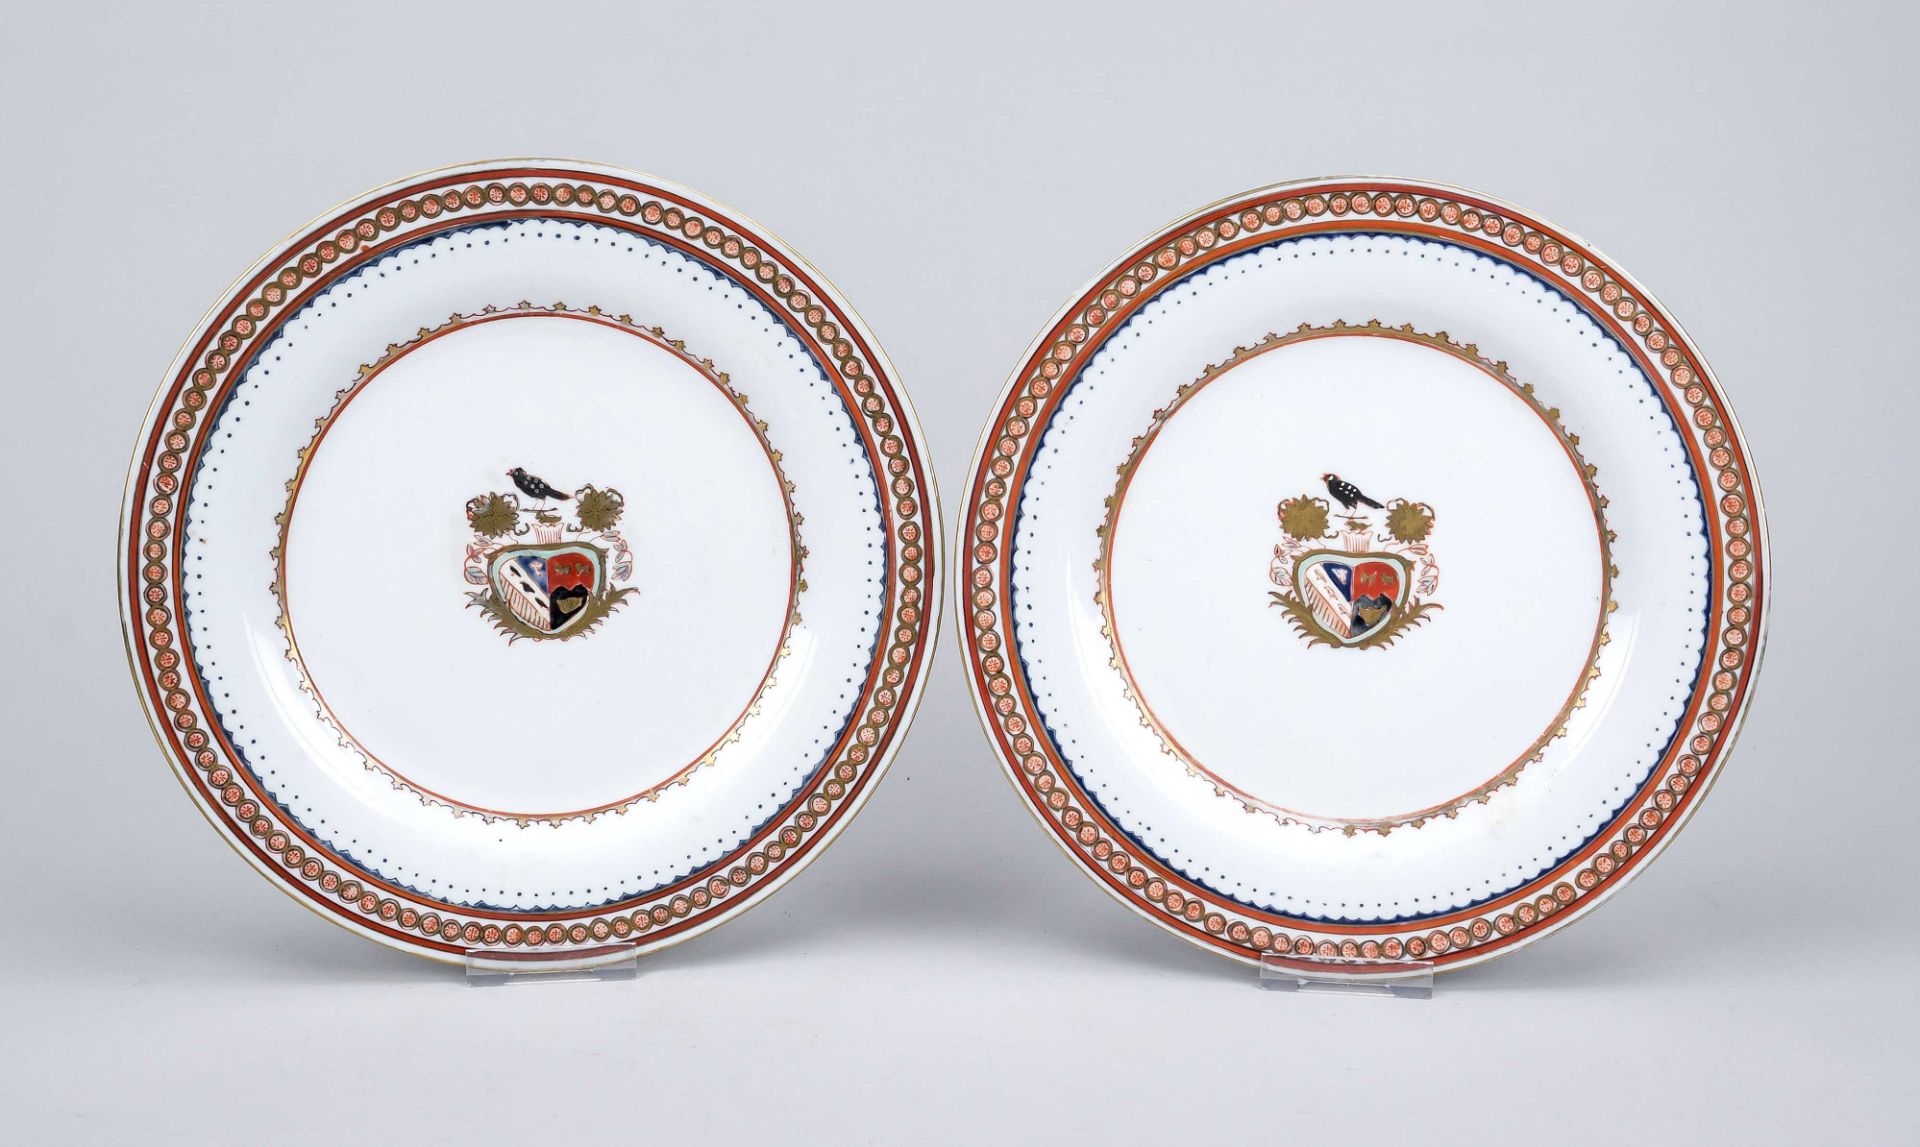 A pair of Armorial ware plates, China 19th century? Each marked ''1851 China'' in iron red under the